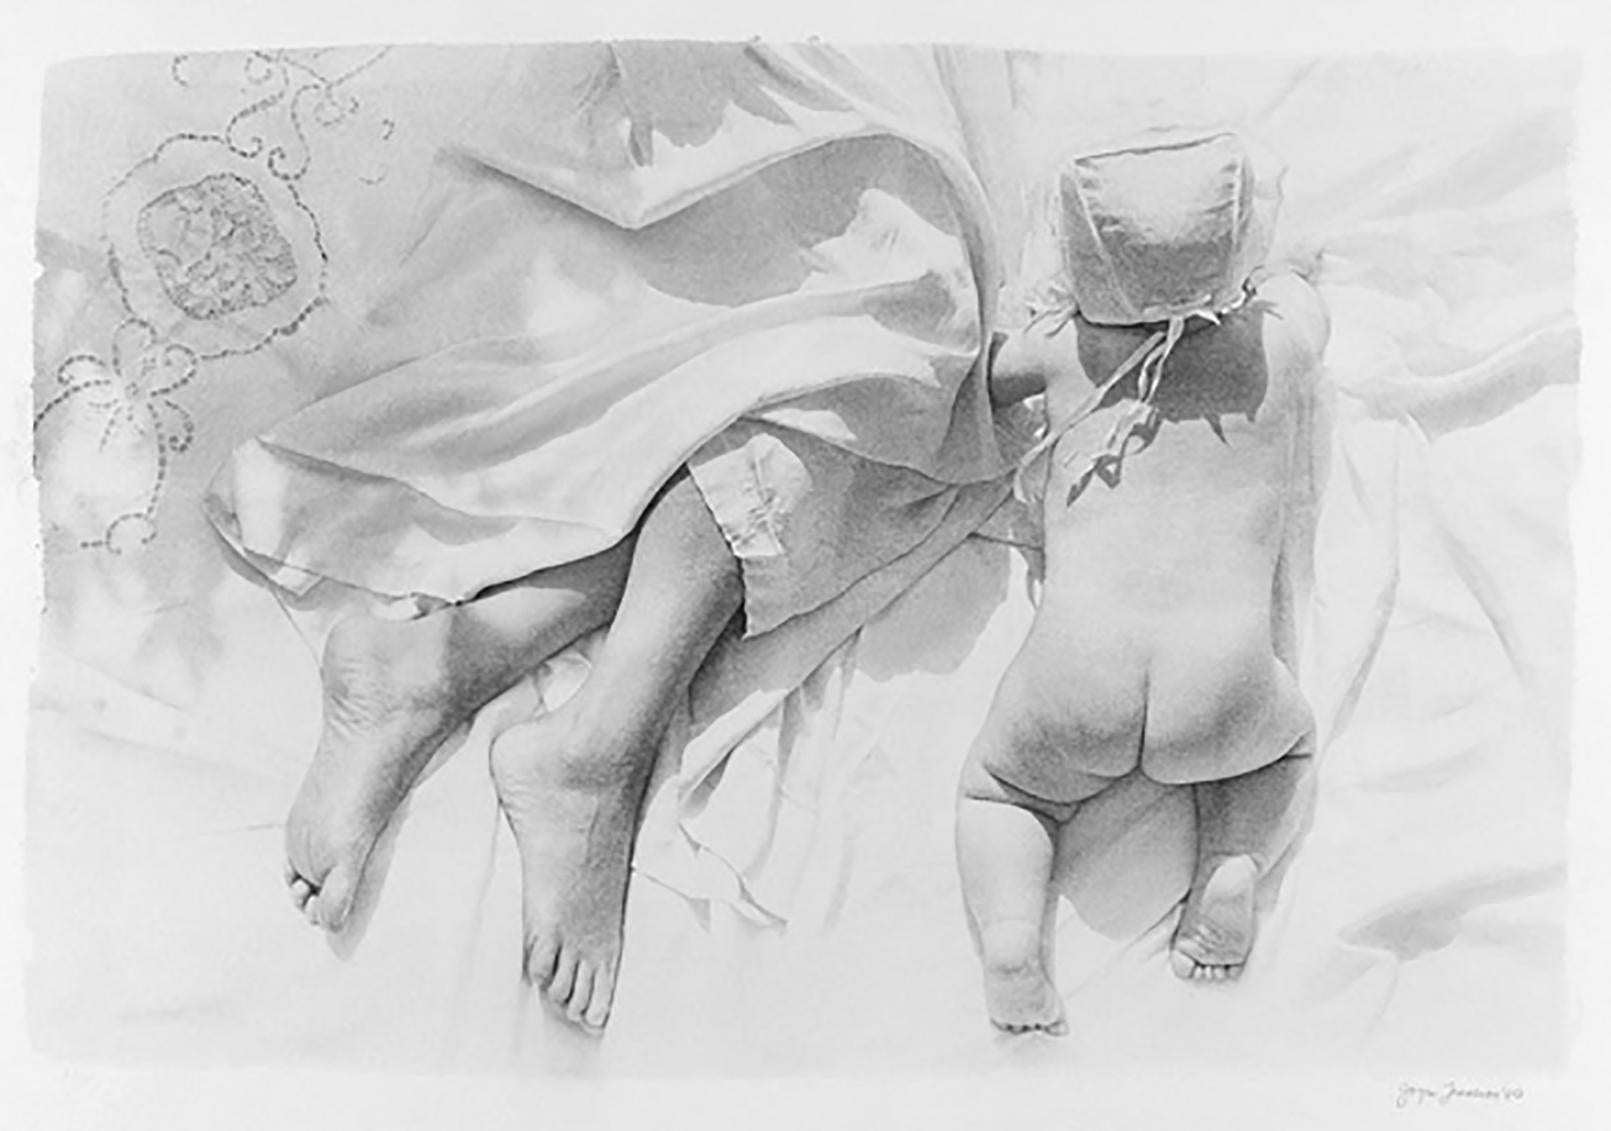 Joyce Tenneson. Mother and Child, 1974 (1981). Image Size: 14 x 20.75", Framed size: 26 x 32". Hand applied silver on Arches Rag Paper. Artist Proof. Signed, dated (1981), and editioned (Artist Proof) on print recto.  

In Fall, 2018, Joyce Tenneson